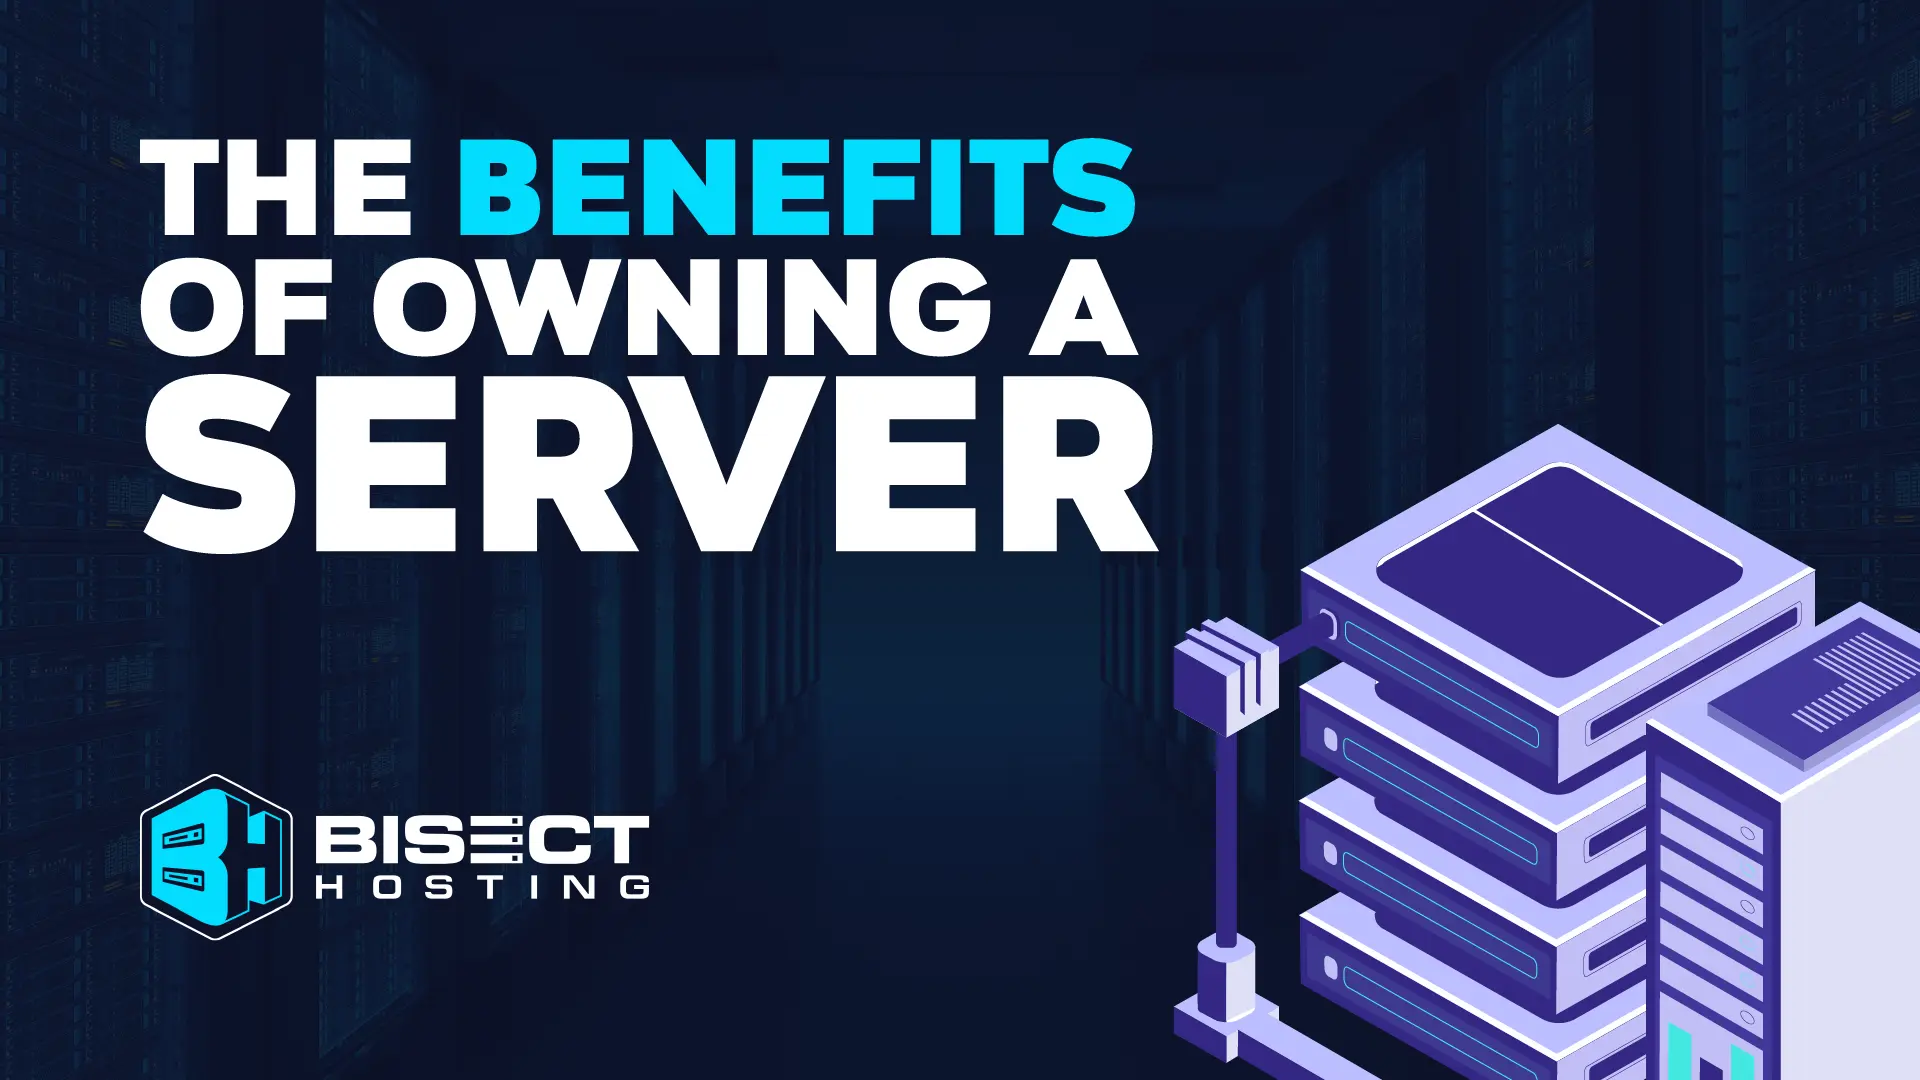 The Benefits of Owning a Server